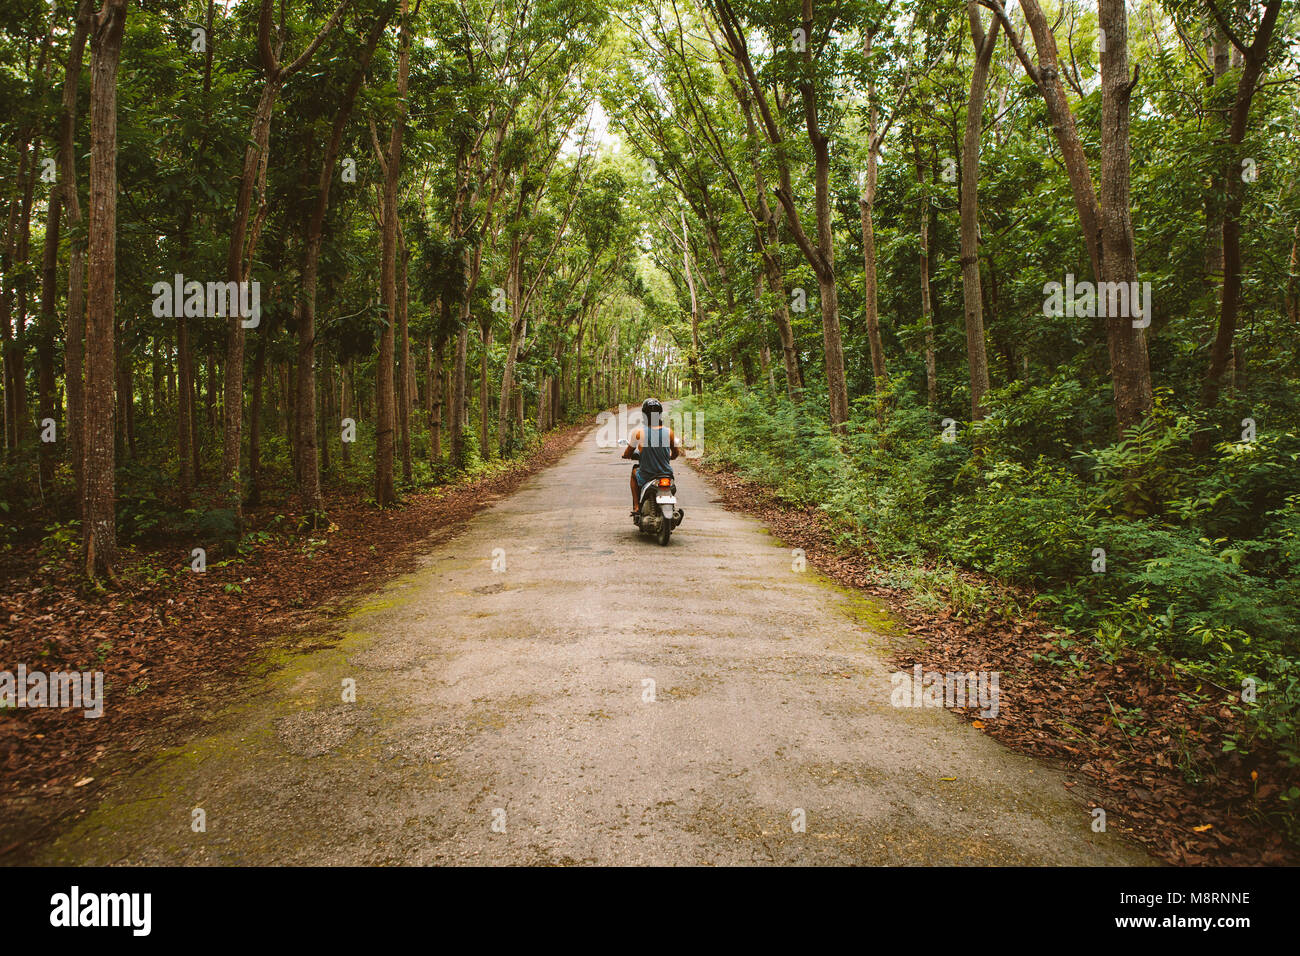 Rear view of man riding motor scooter on road amidst trees at forest Stock Photo